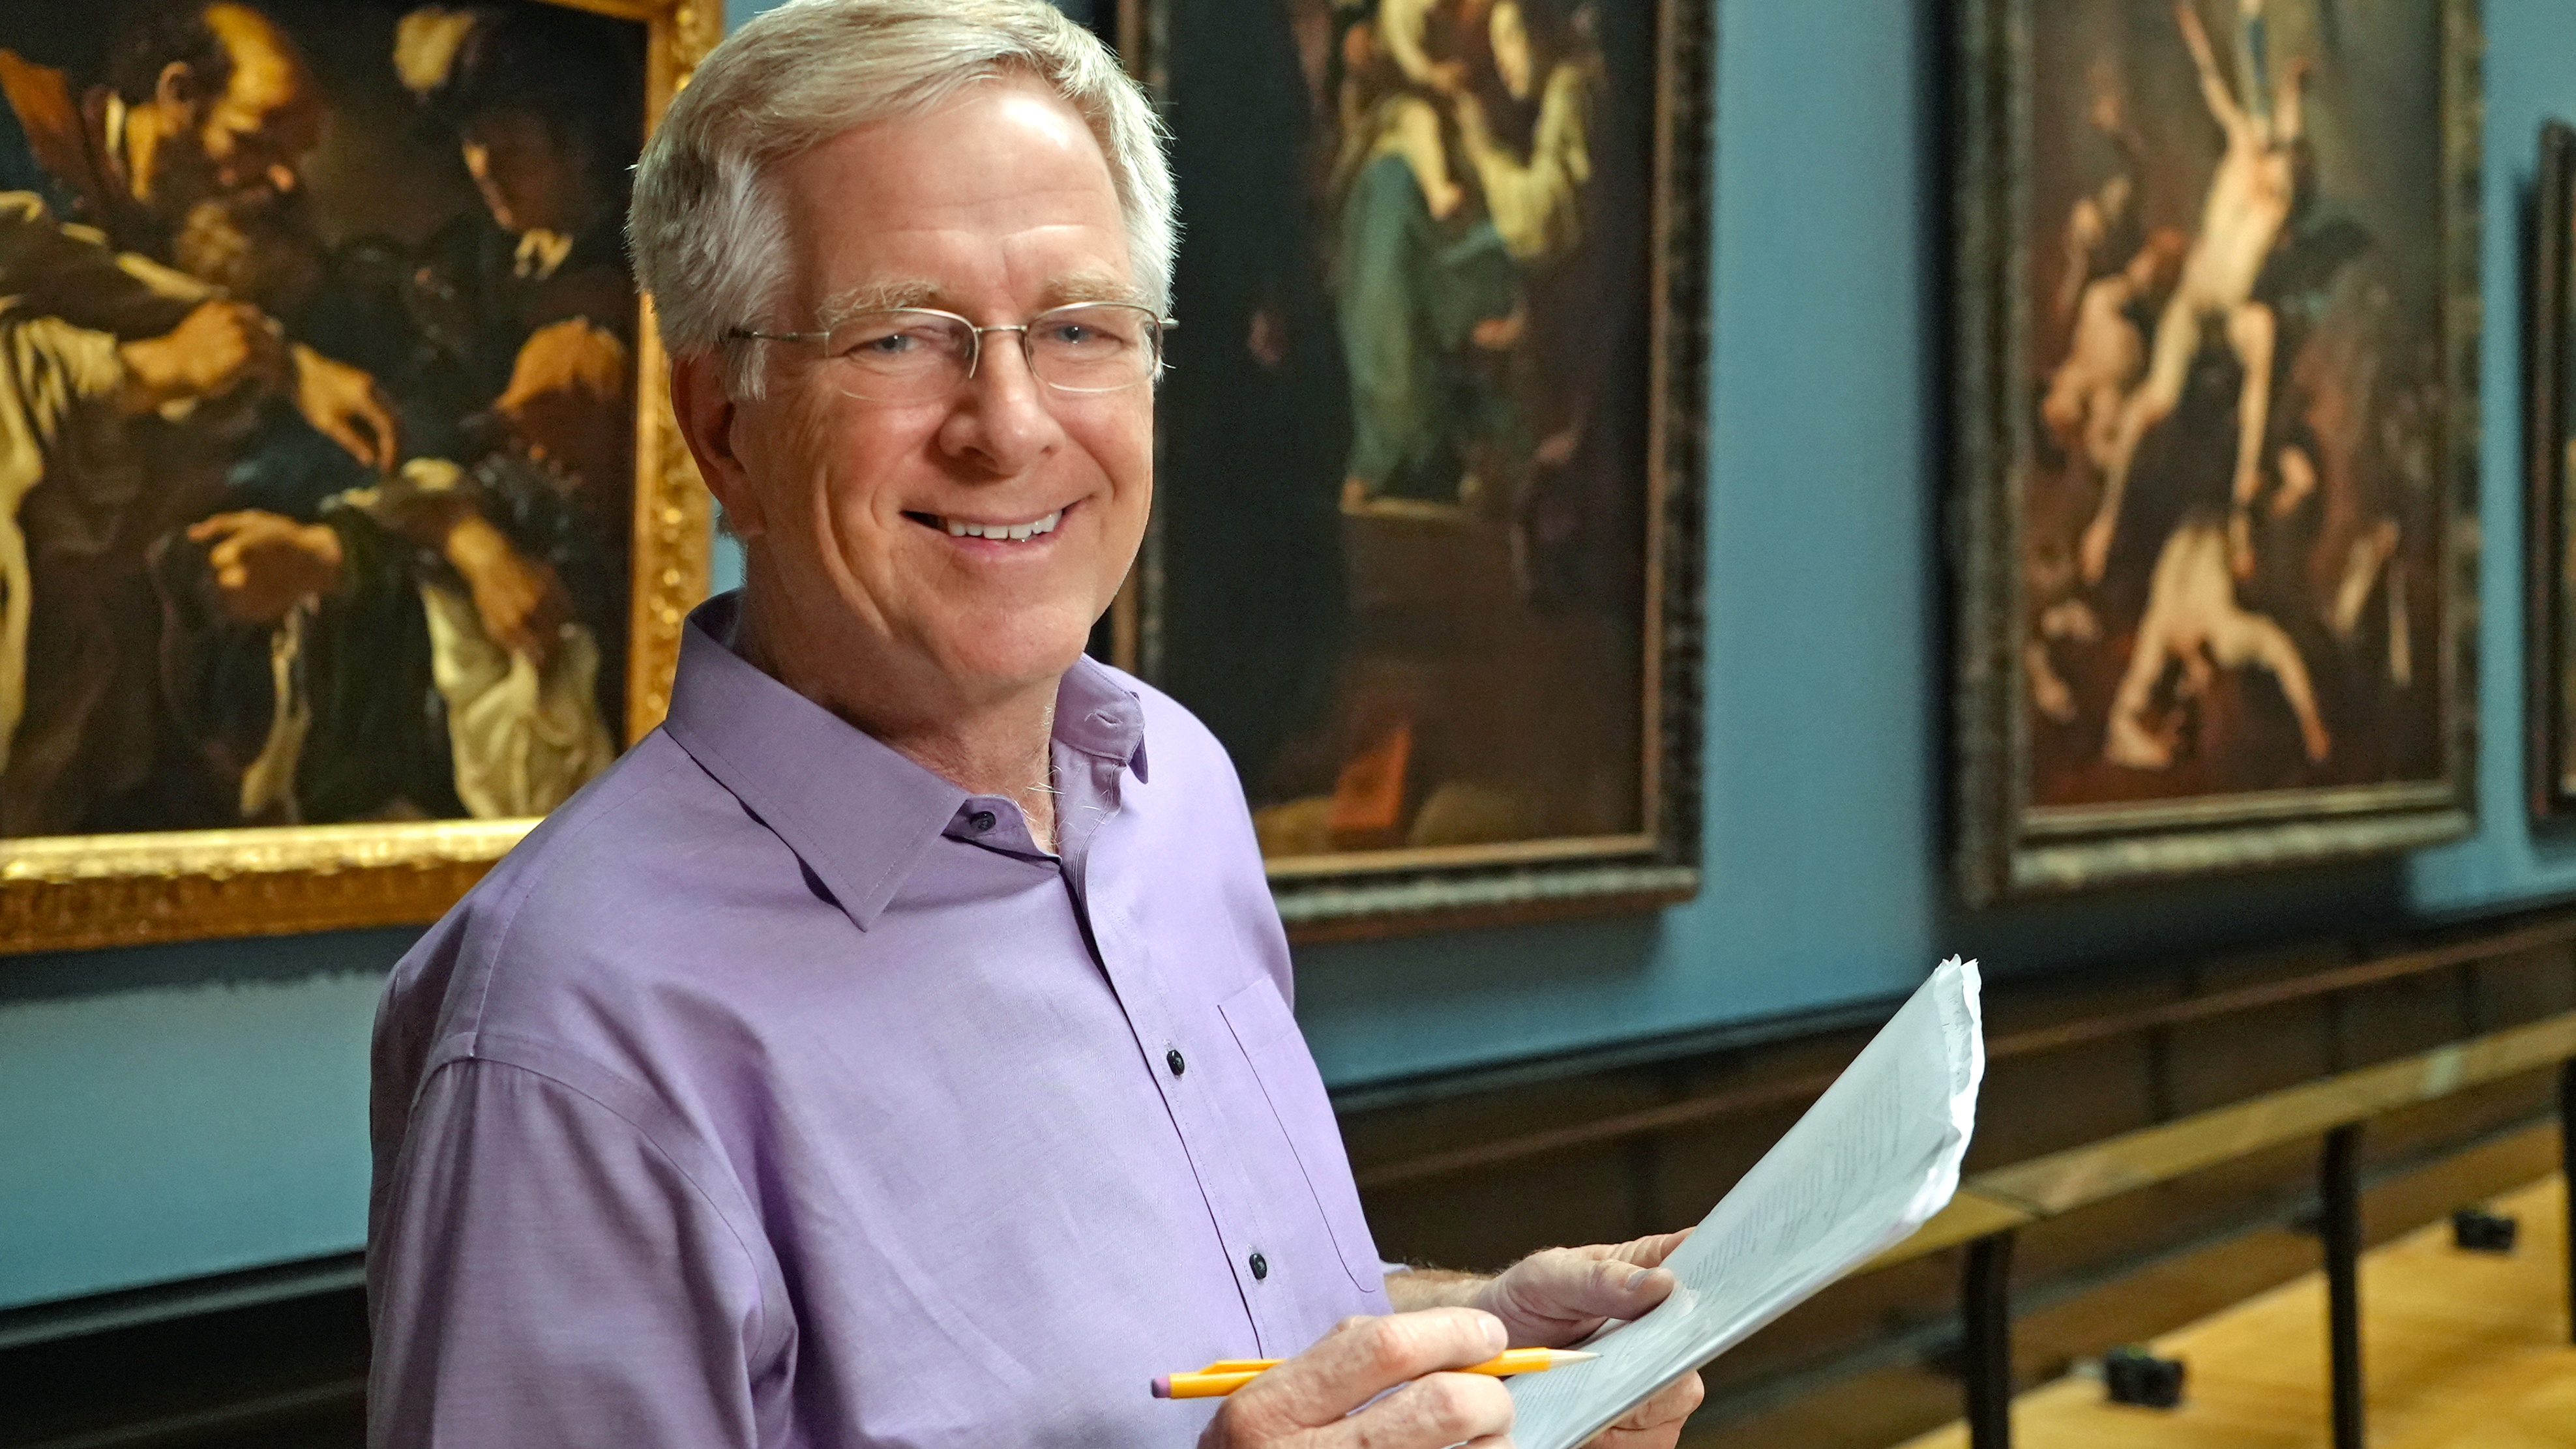 Rick Steves at the Kunsthistorisches museum in Vienna.